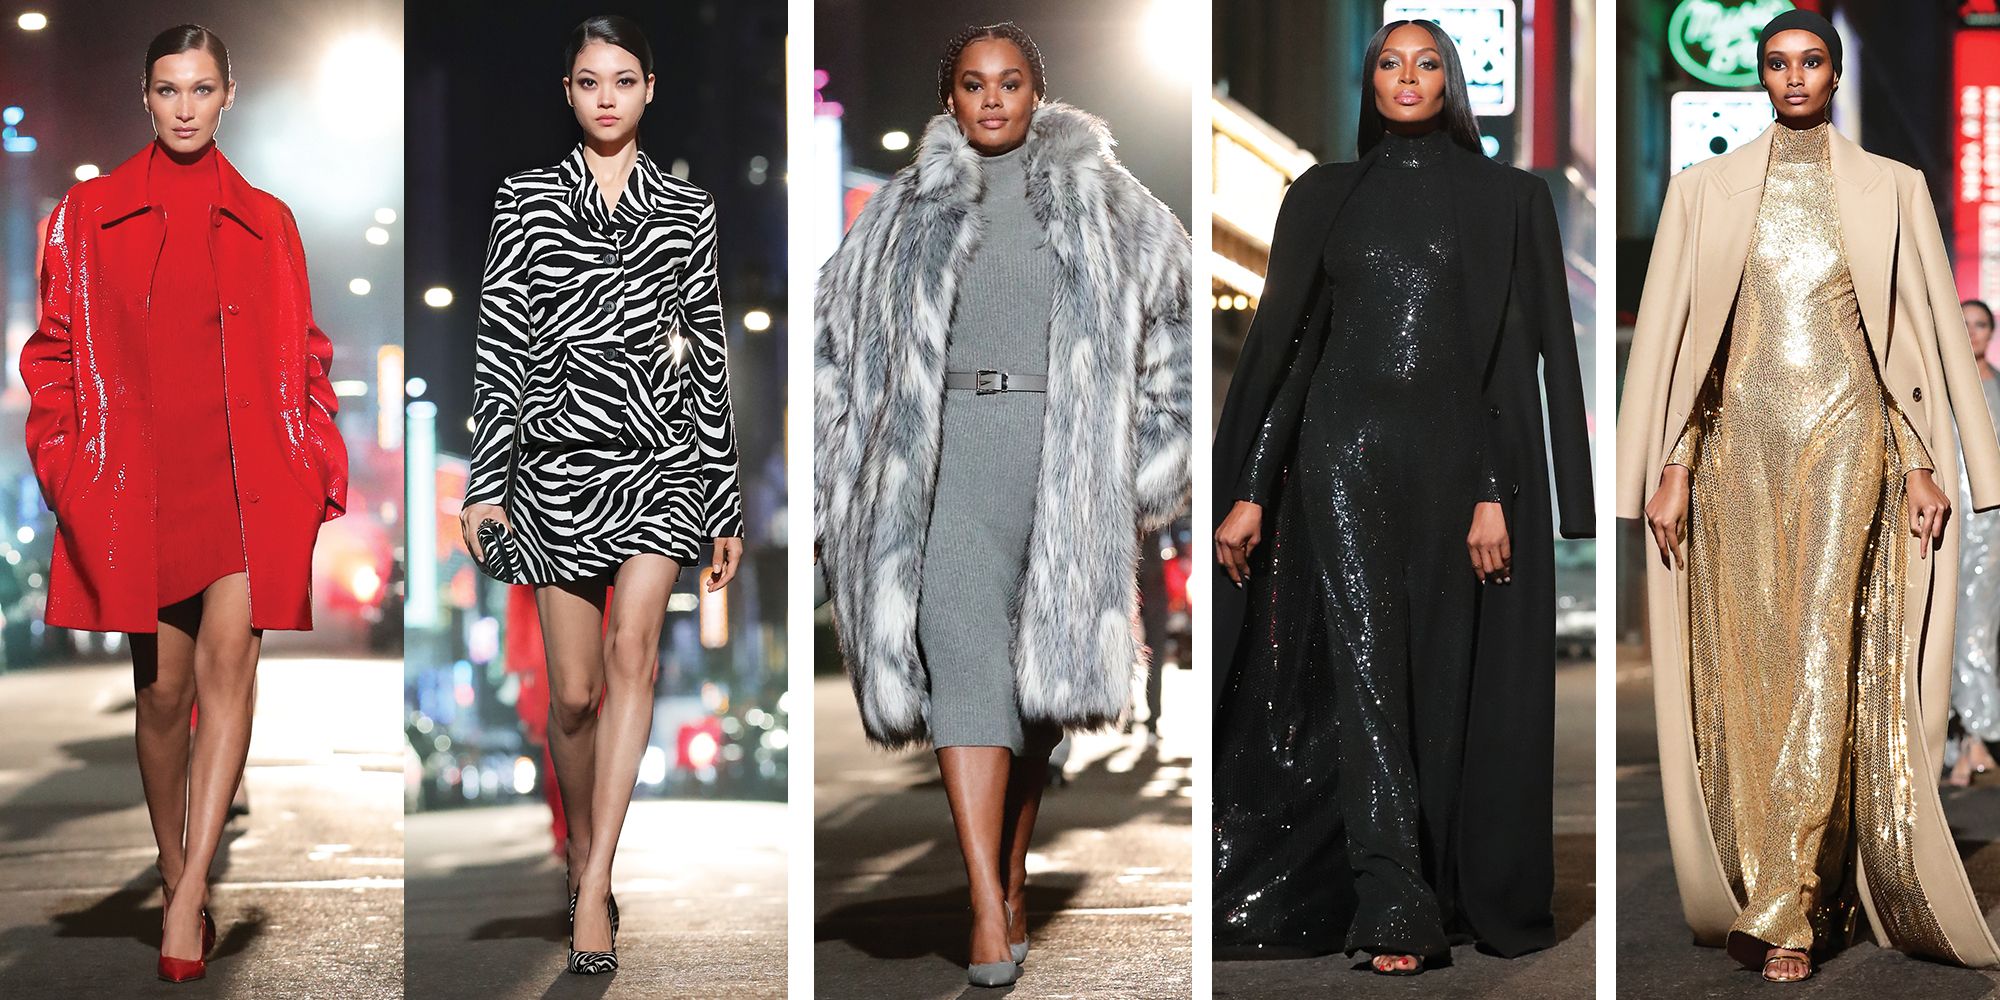 Michael Kors Collection's New York State of Mind